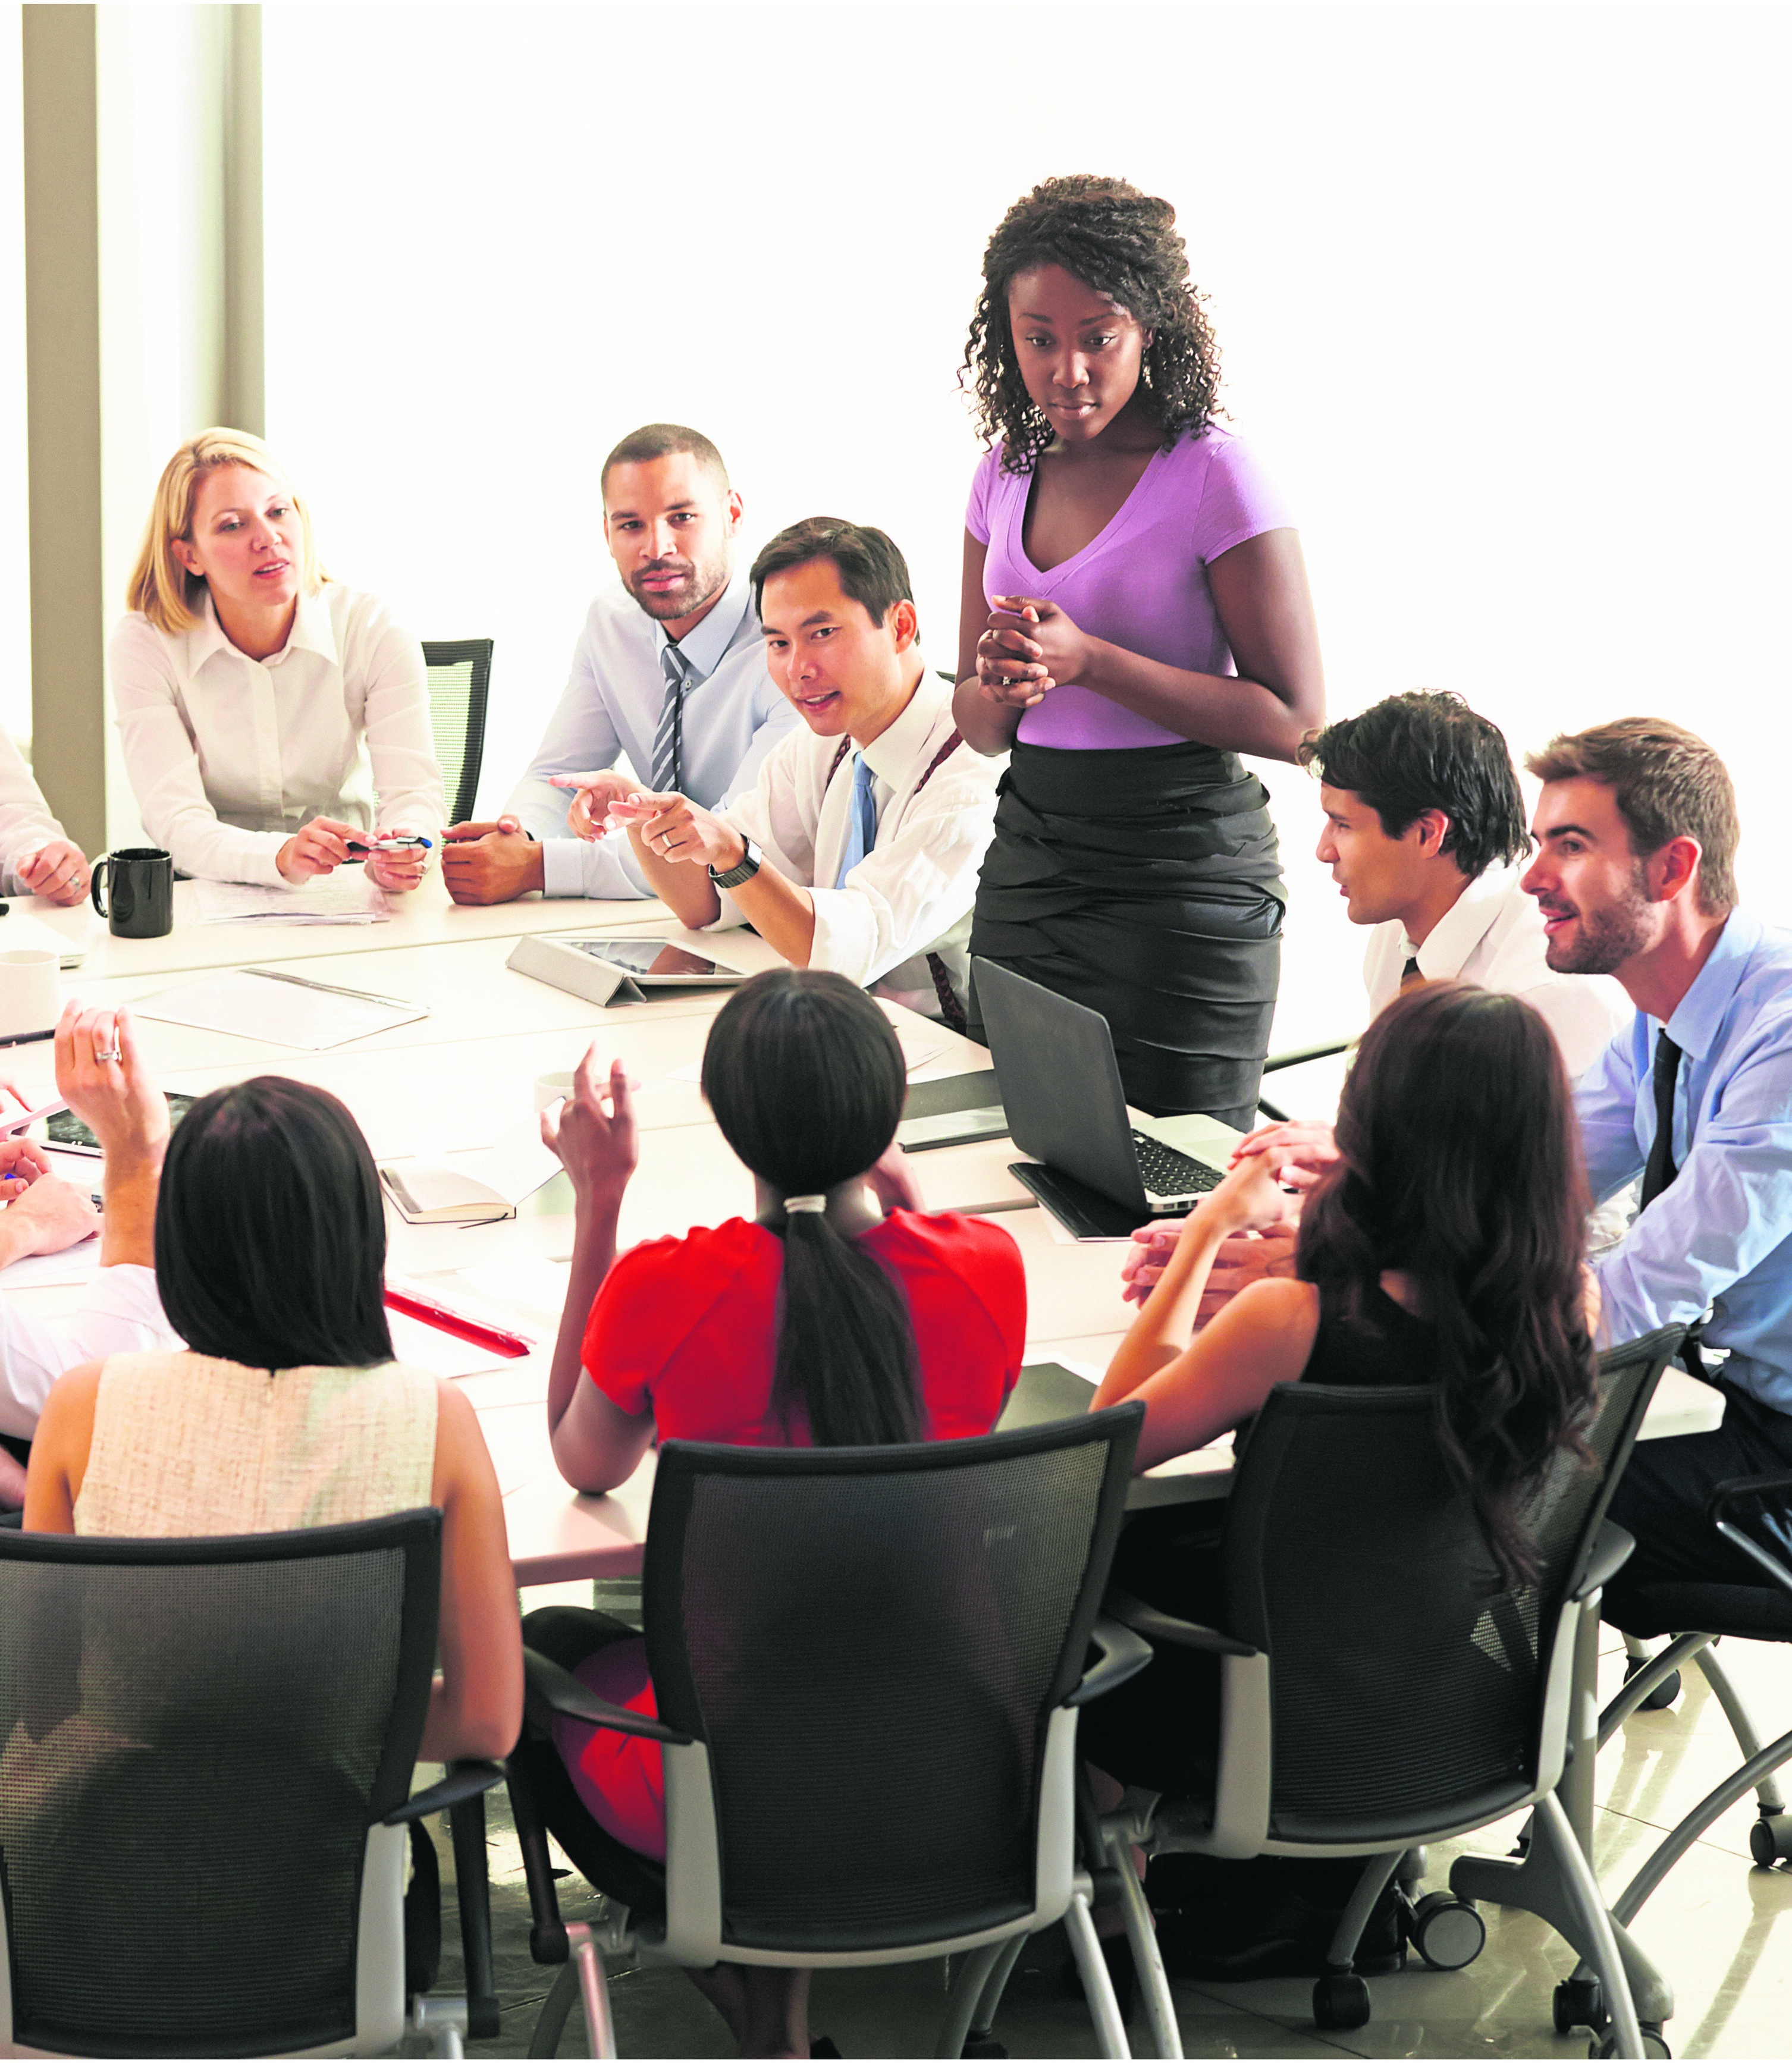 leadership 
If you act like a leader, your team members will produce effective results

PHOTO: istock

